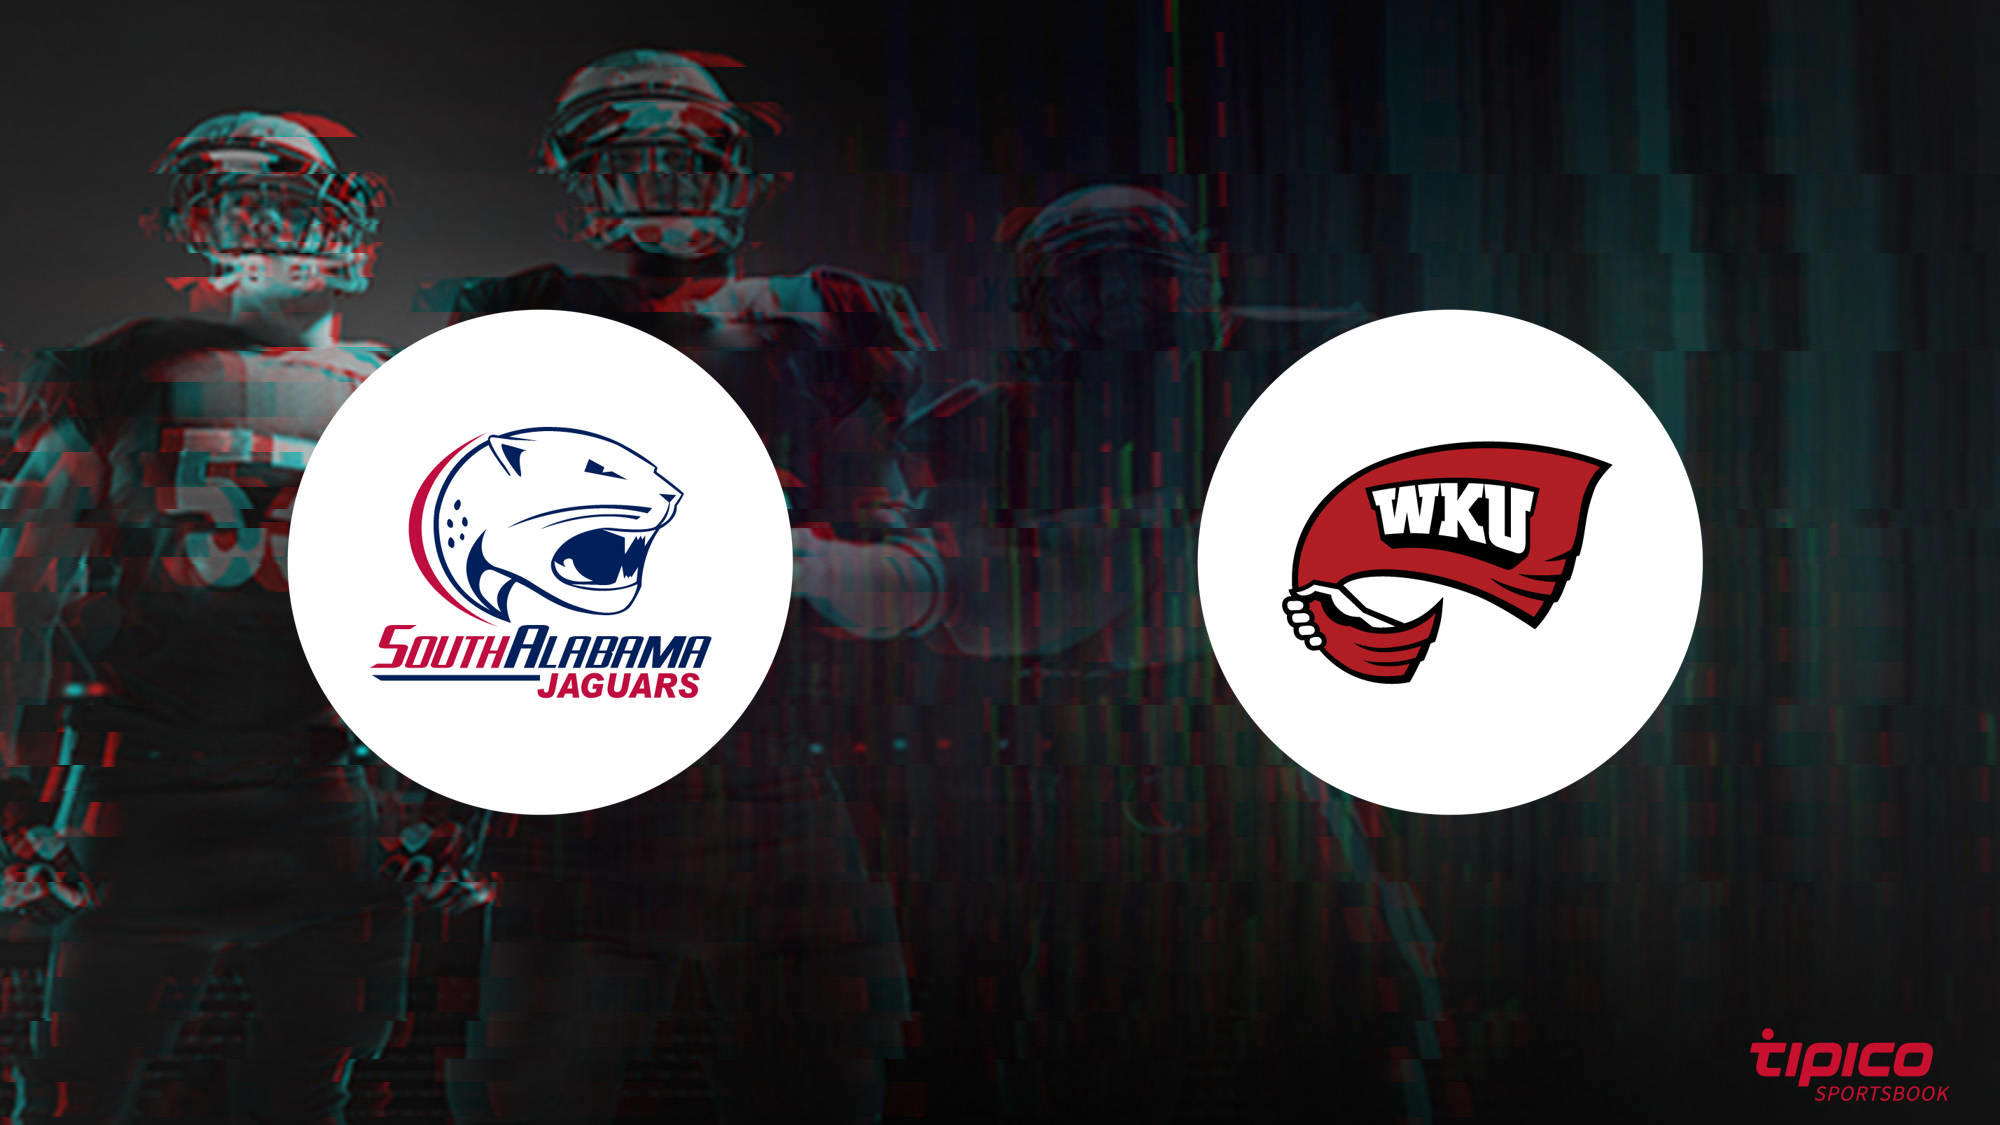 South Alabama Jaguars vs. Western Kentucky Hilltoppers Preview